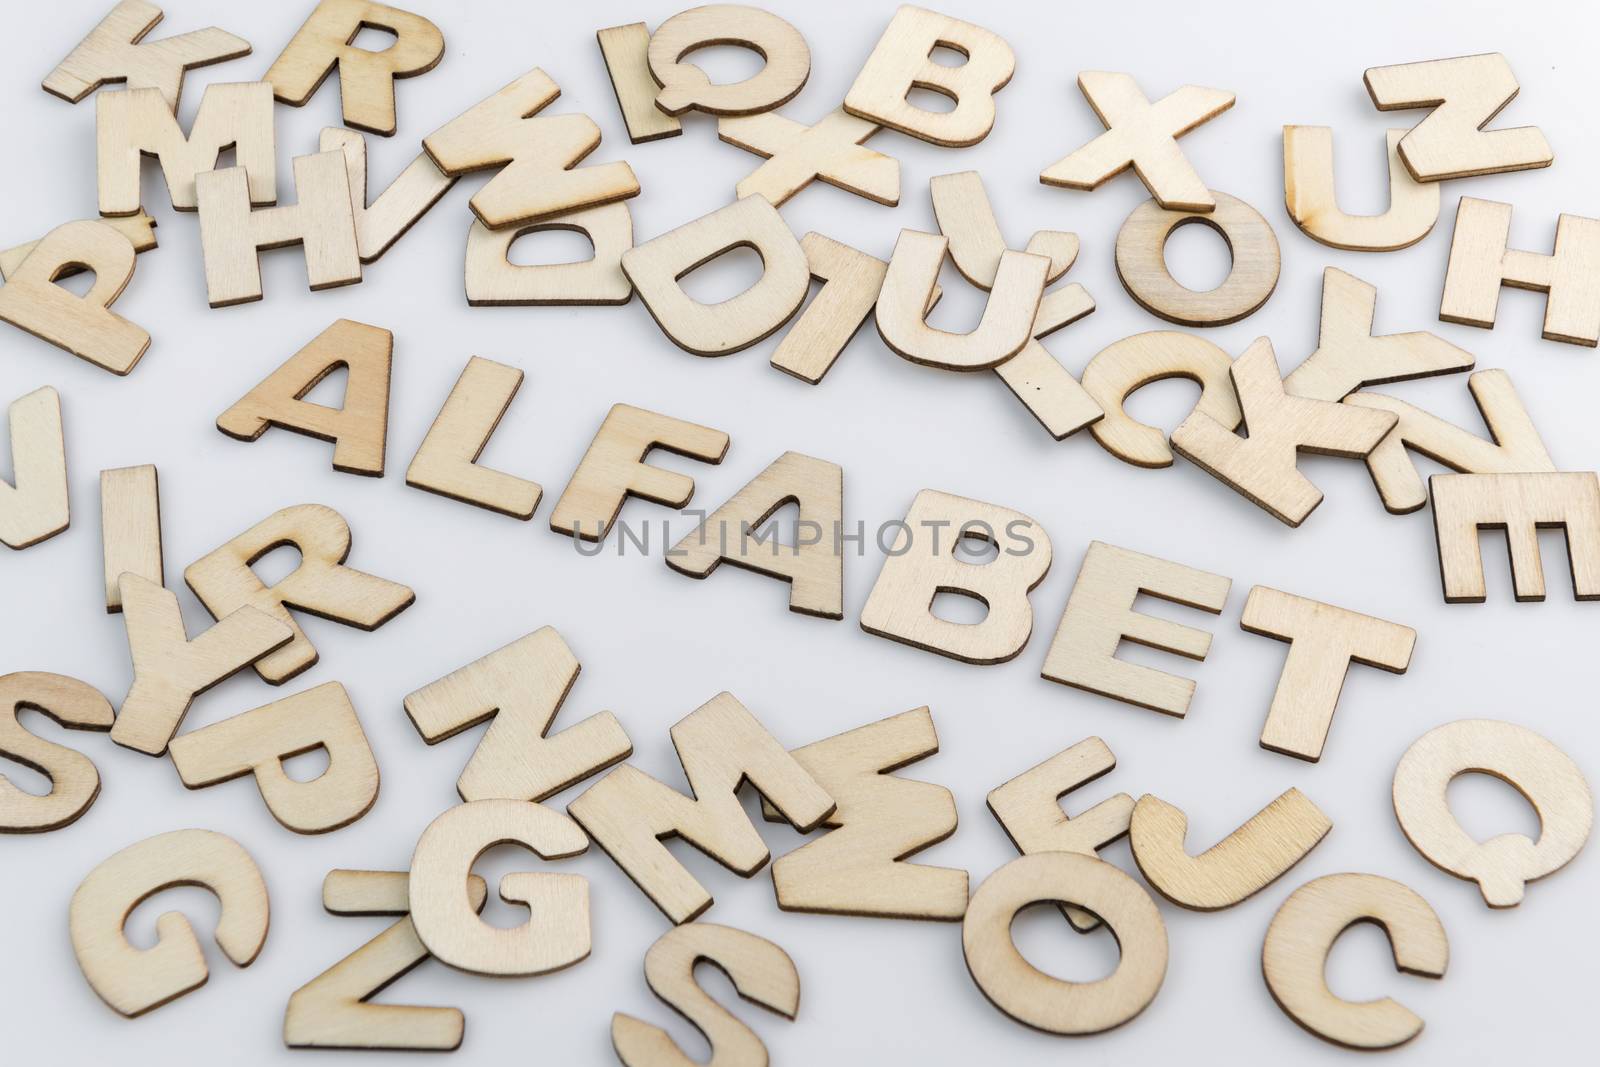 The word alphabet in Dutch translation in wooden letters diagonally placed with loose wooden letters around it.
